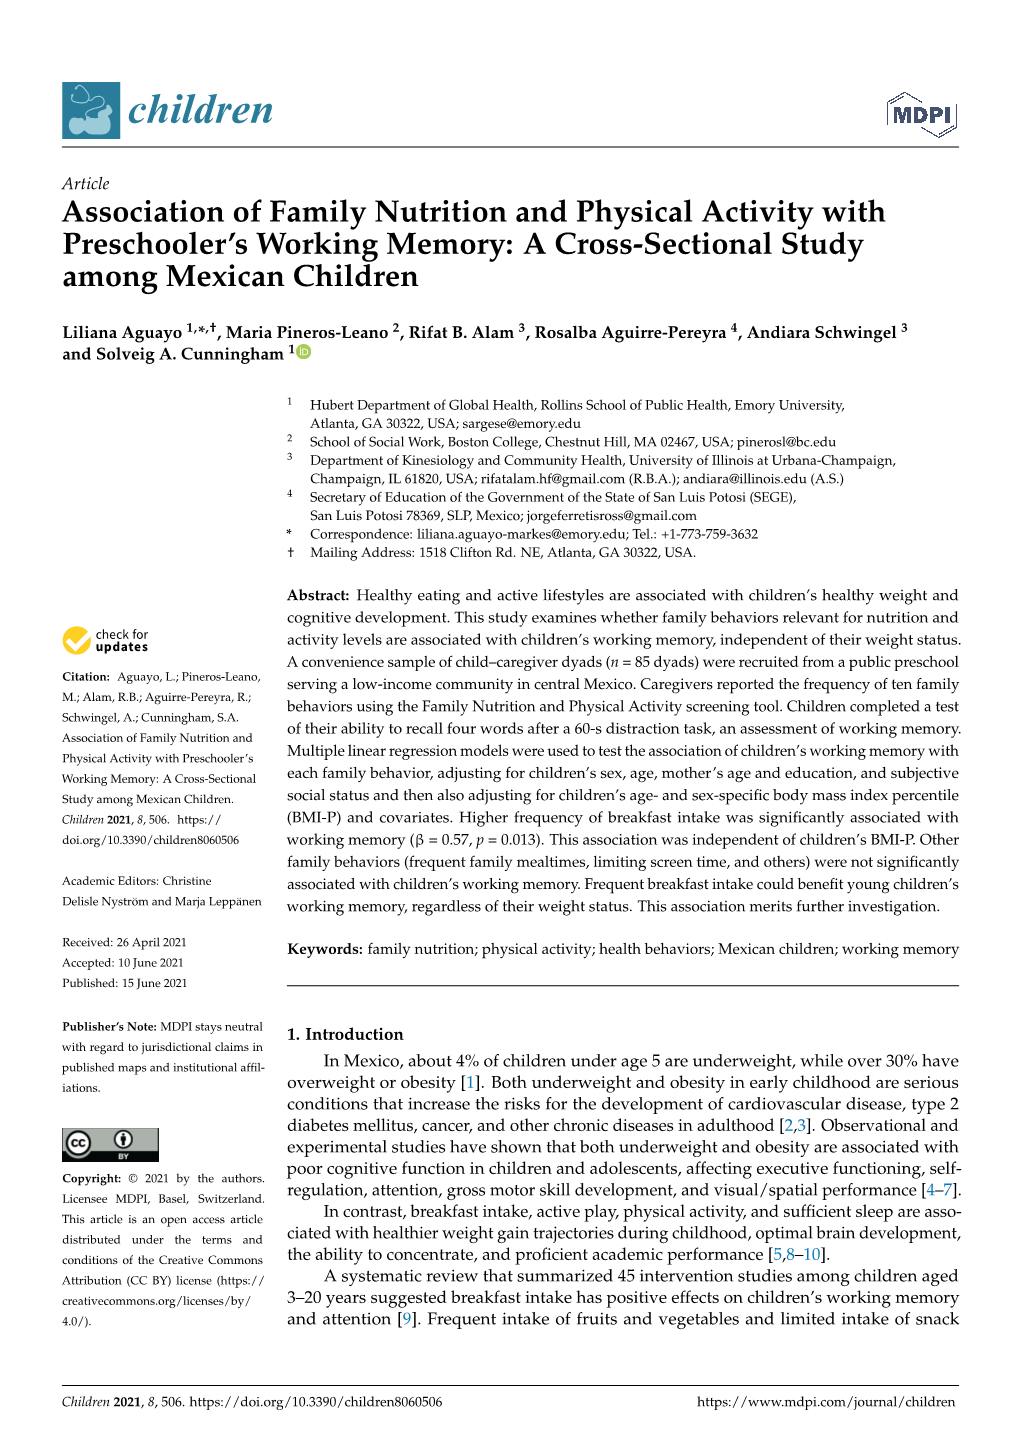 Association of Family Nutrition and Physical Activity with Preschooler's Working Memory